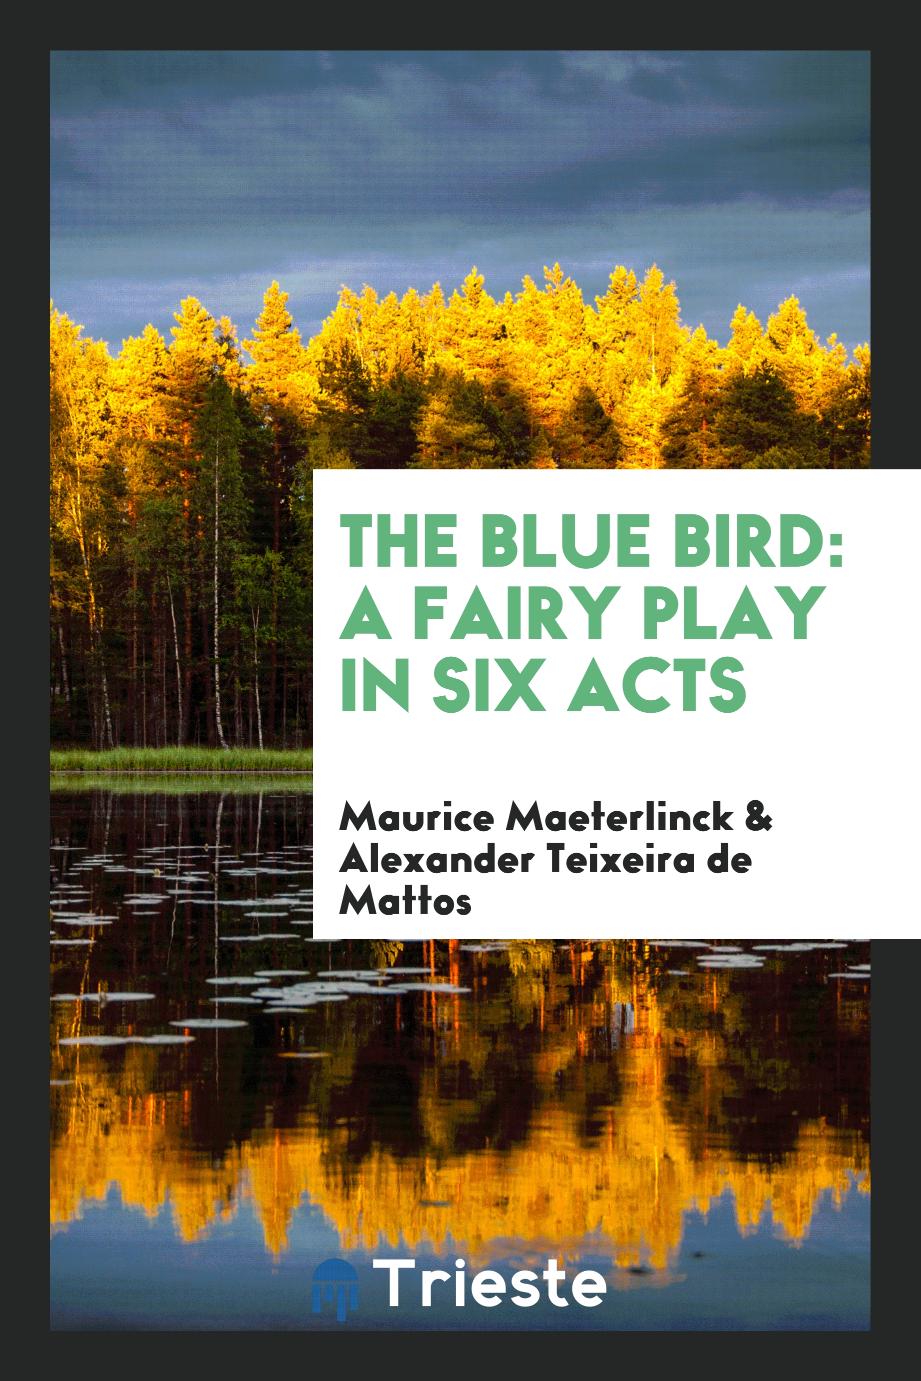 The blue bird: a fairy play in six acts